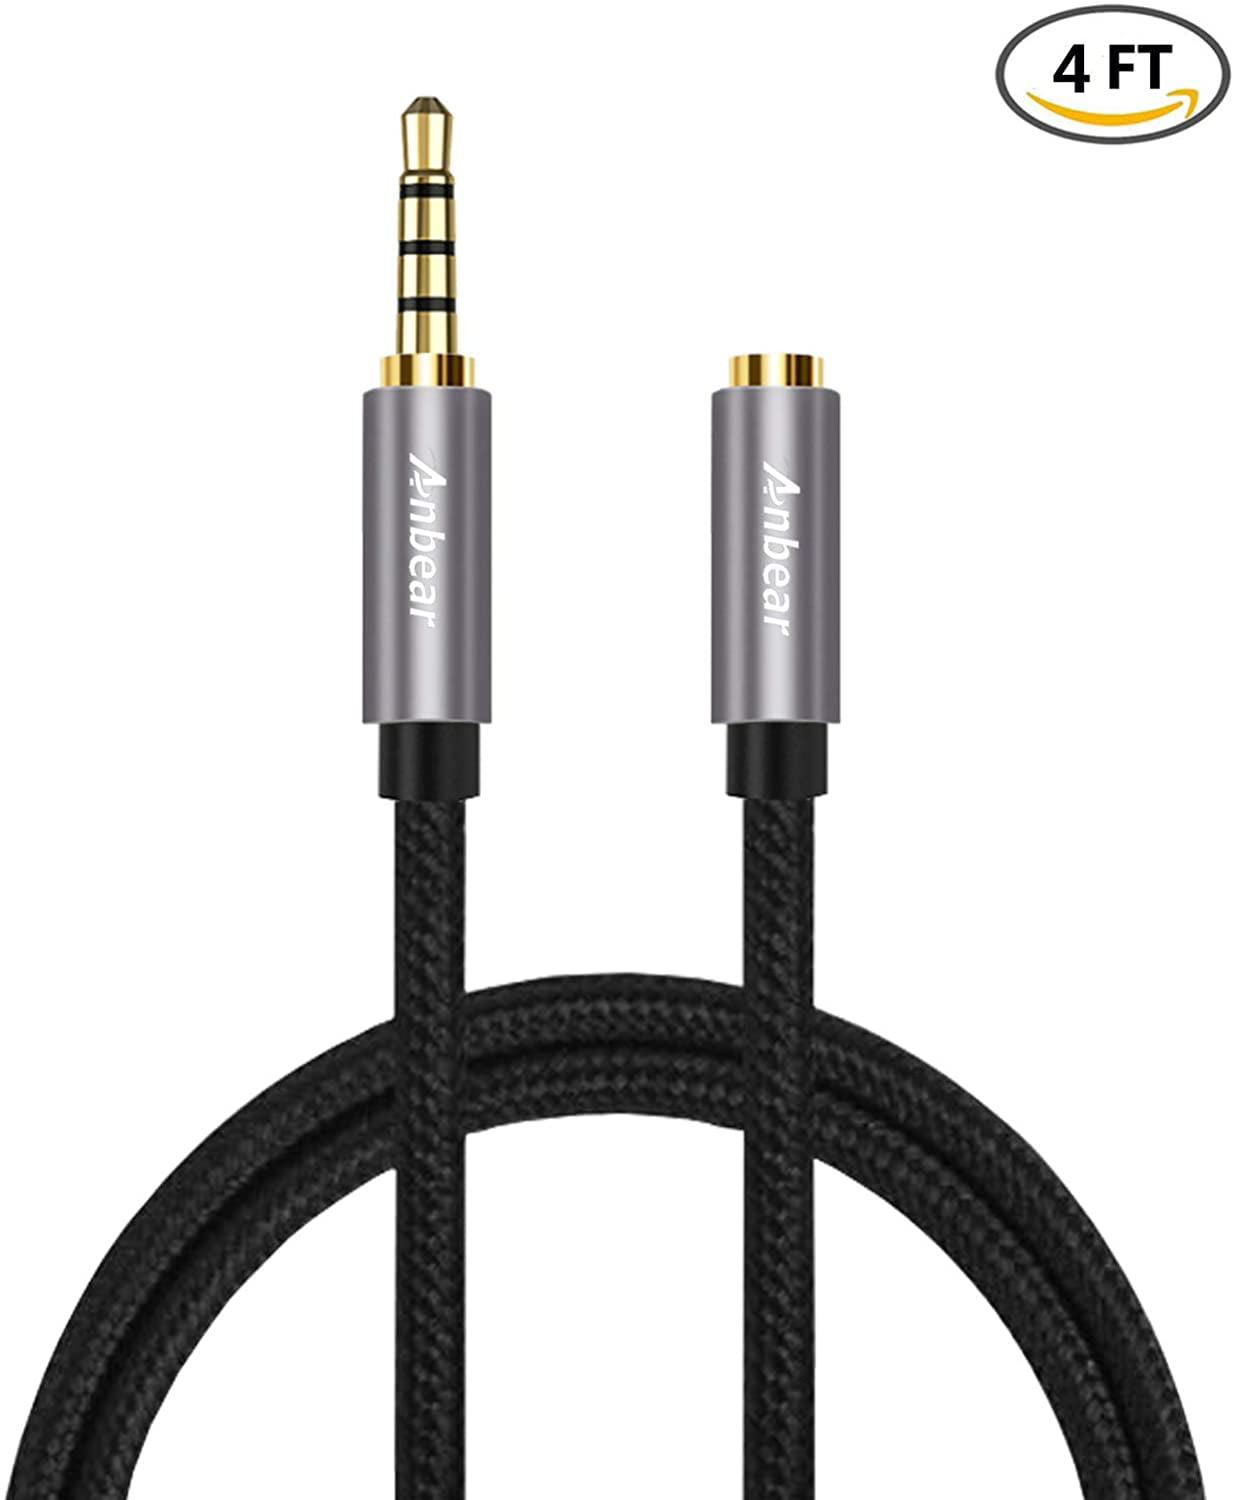 Anbear Gold Plated 3.5mm Stereo Audio Cable Male to Female Nylon Braided Audio Cord Extension Cable Compatible with iPad,Smartphones,Tablets,Media Players Hi-Fi Sound Headphone Extension Cable 4FT 